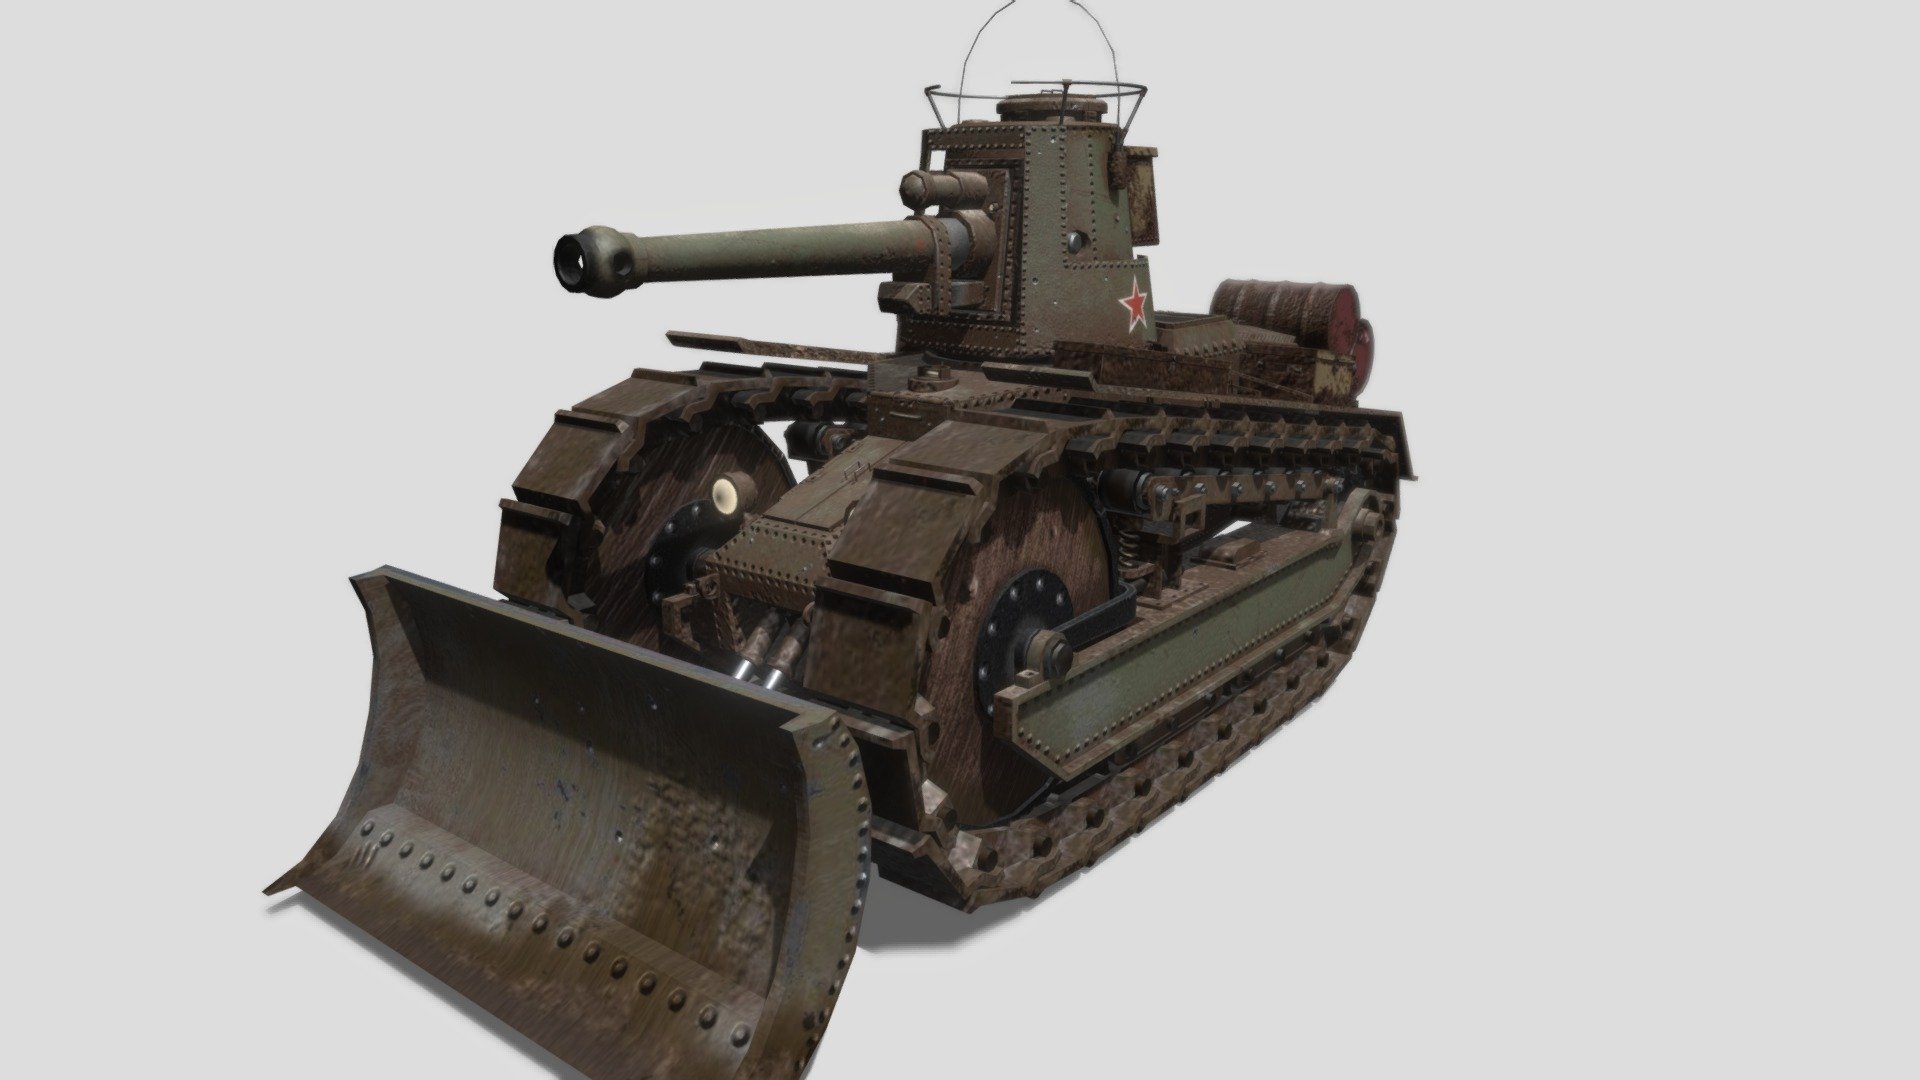 This model is inpired from the Renault FT 17 turreted French tank. It's a low poly made for a Turn Based Strategy Game project I'm working on with classmates 3d model